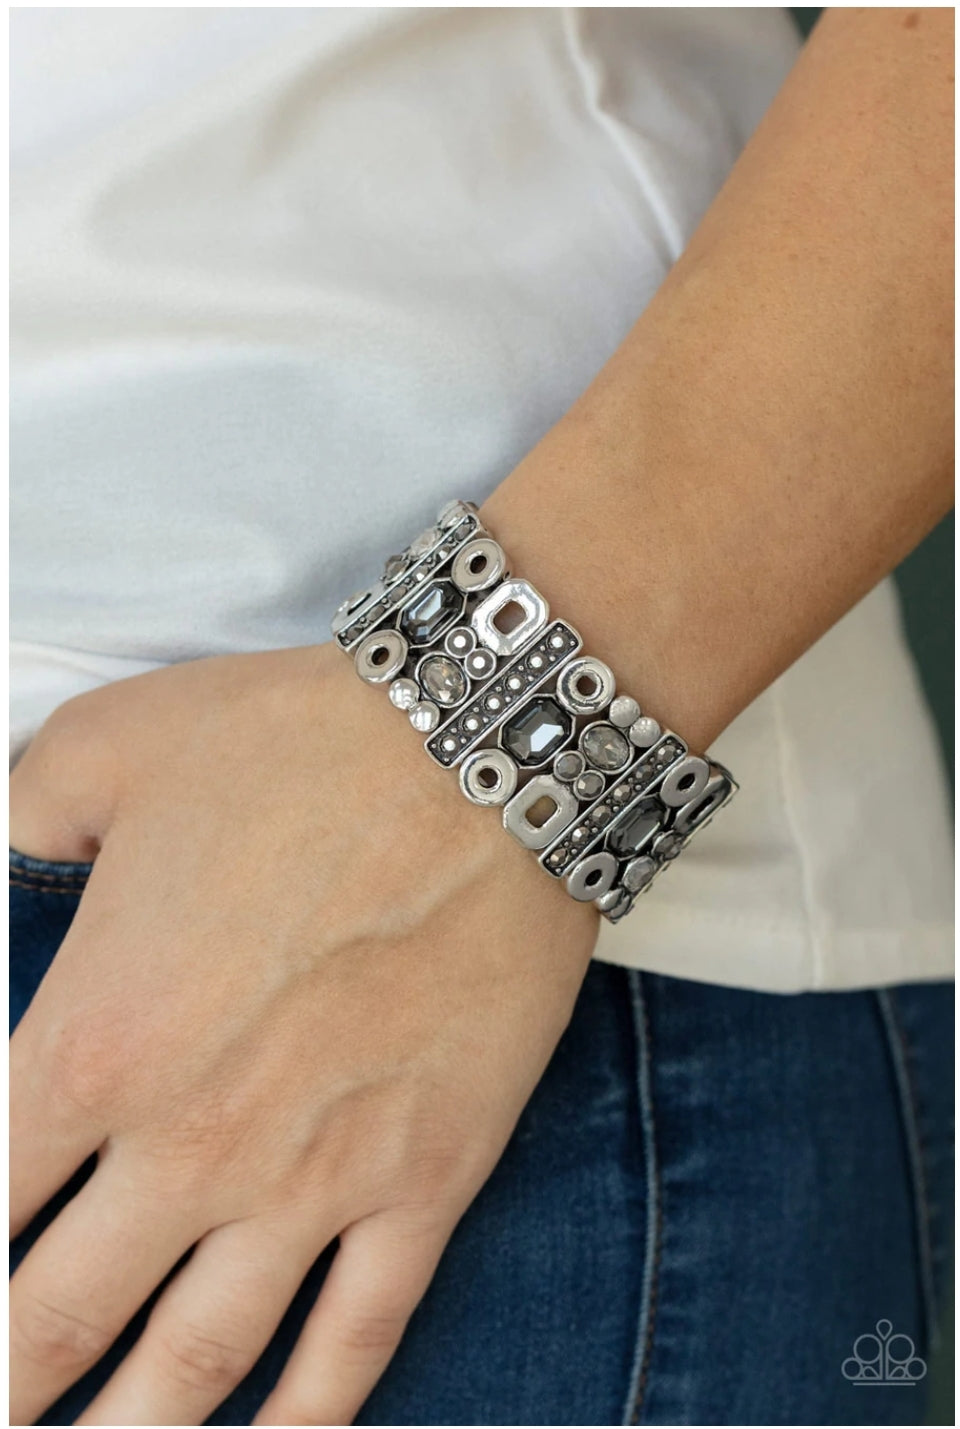 Dynamically Diverse - White - Bling With Crystal